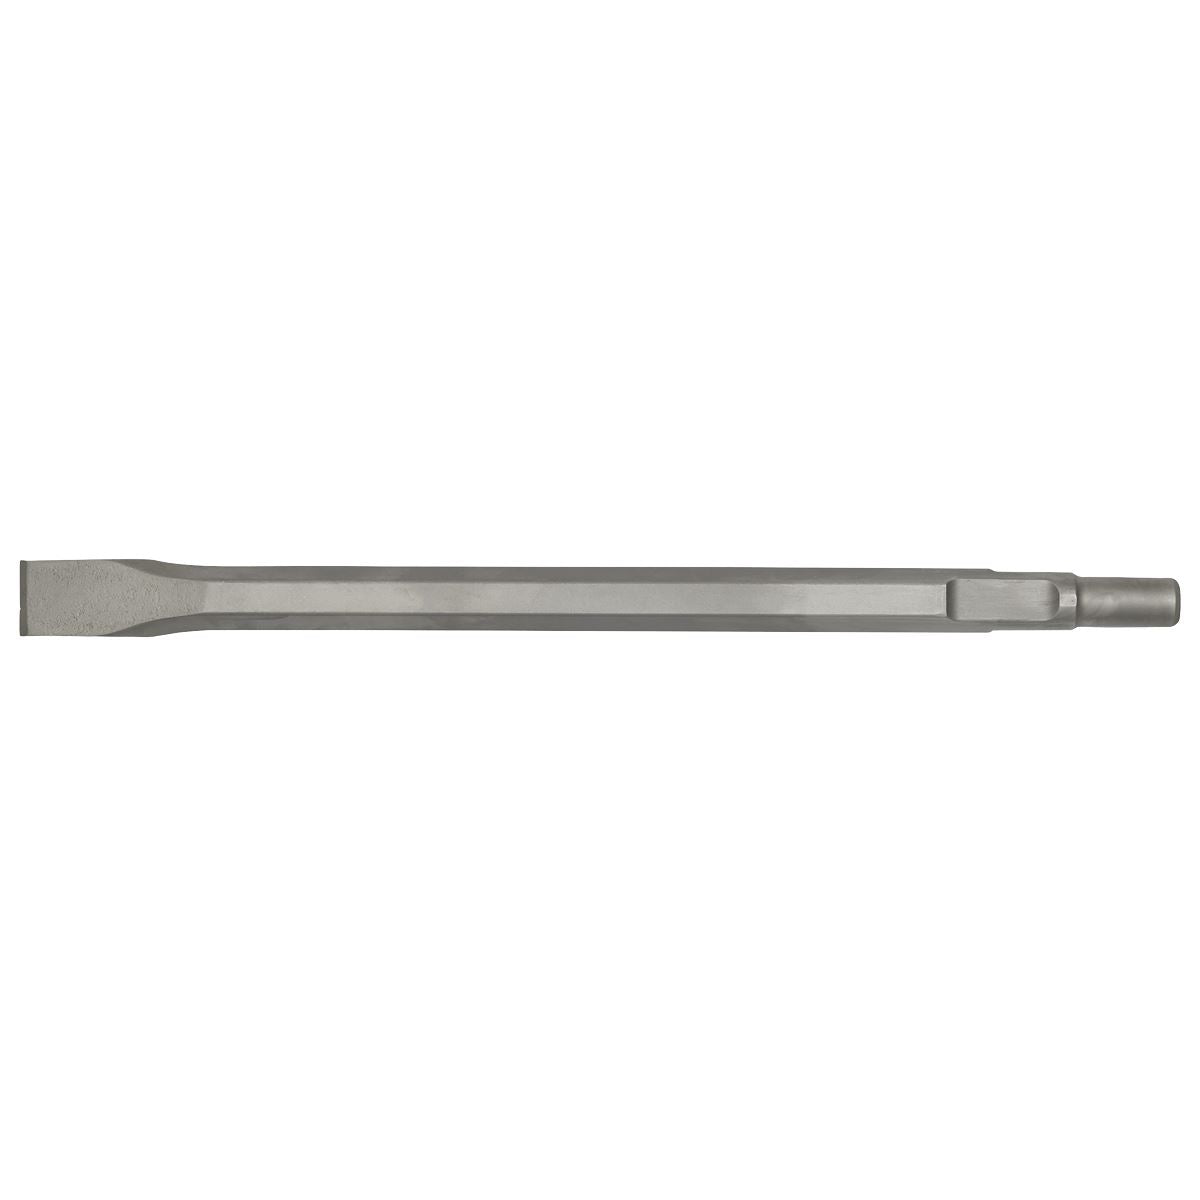 Worksafe by Sealey Chisel 25 x 375mm - Bosch 11208